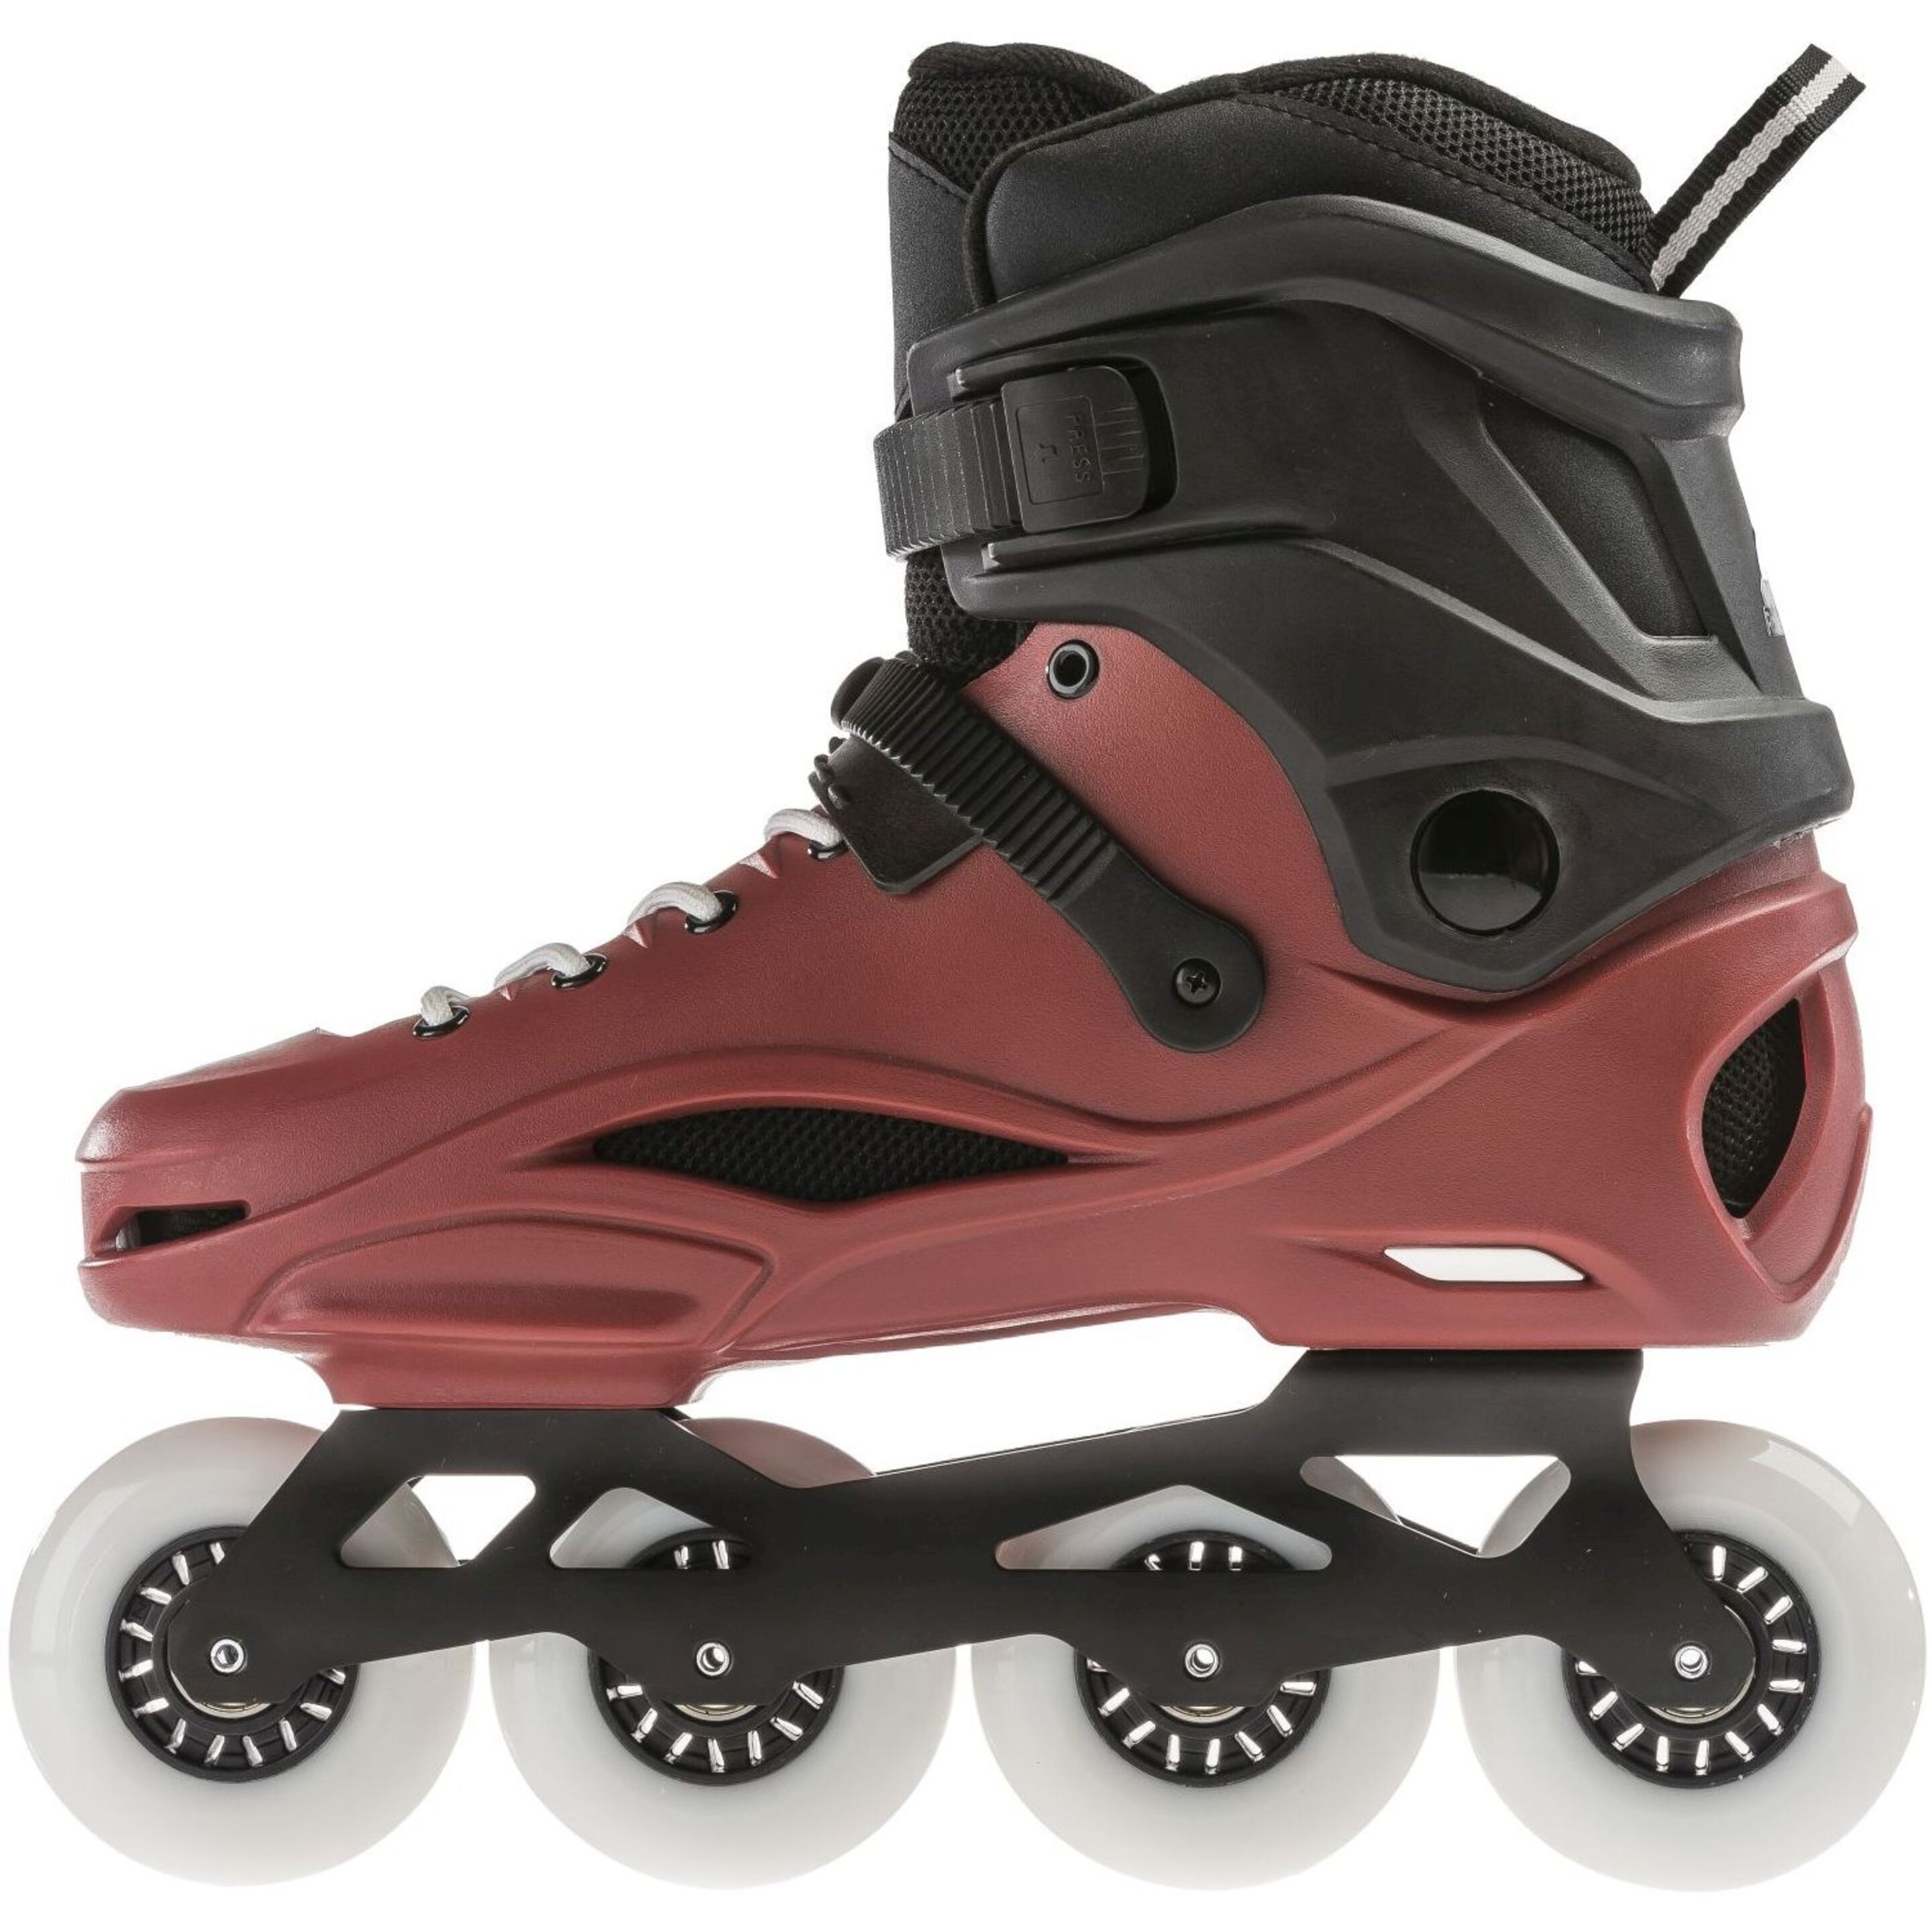 Patines Rb 80 Pro Rollerblade